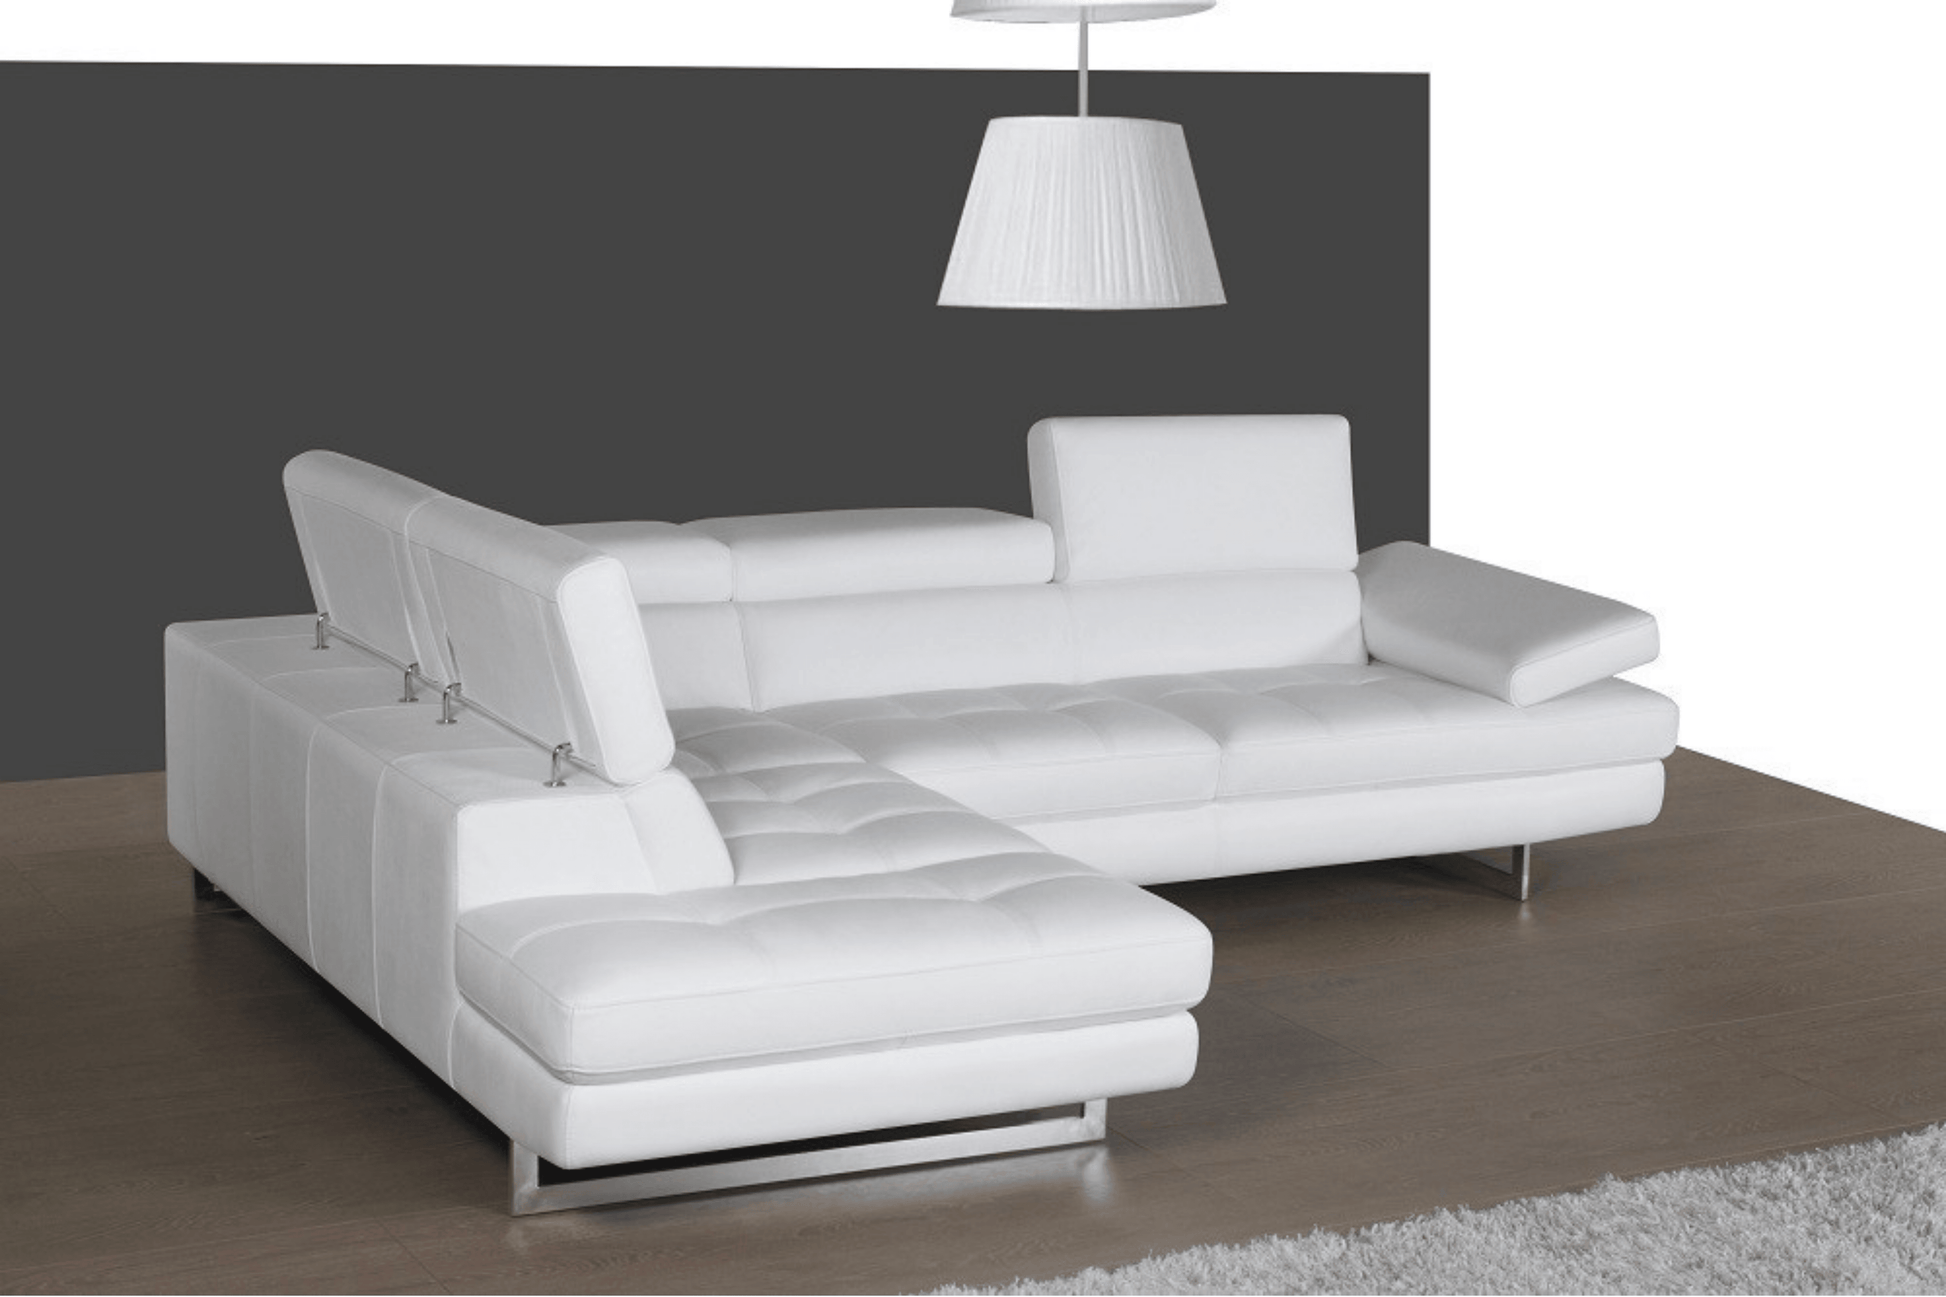 A761 Italian Leather Sectional in Snow White - Venini Furniture 